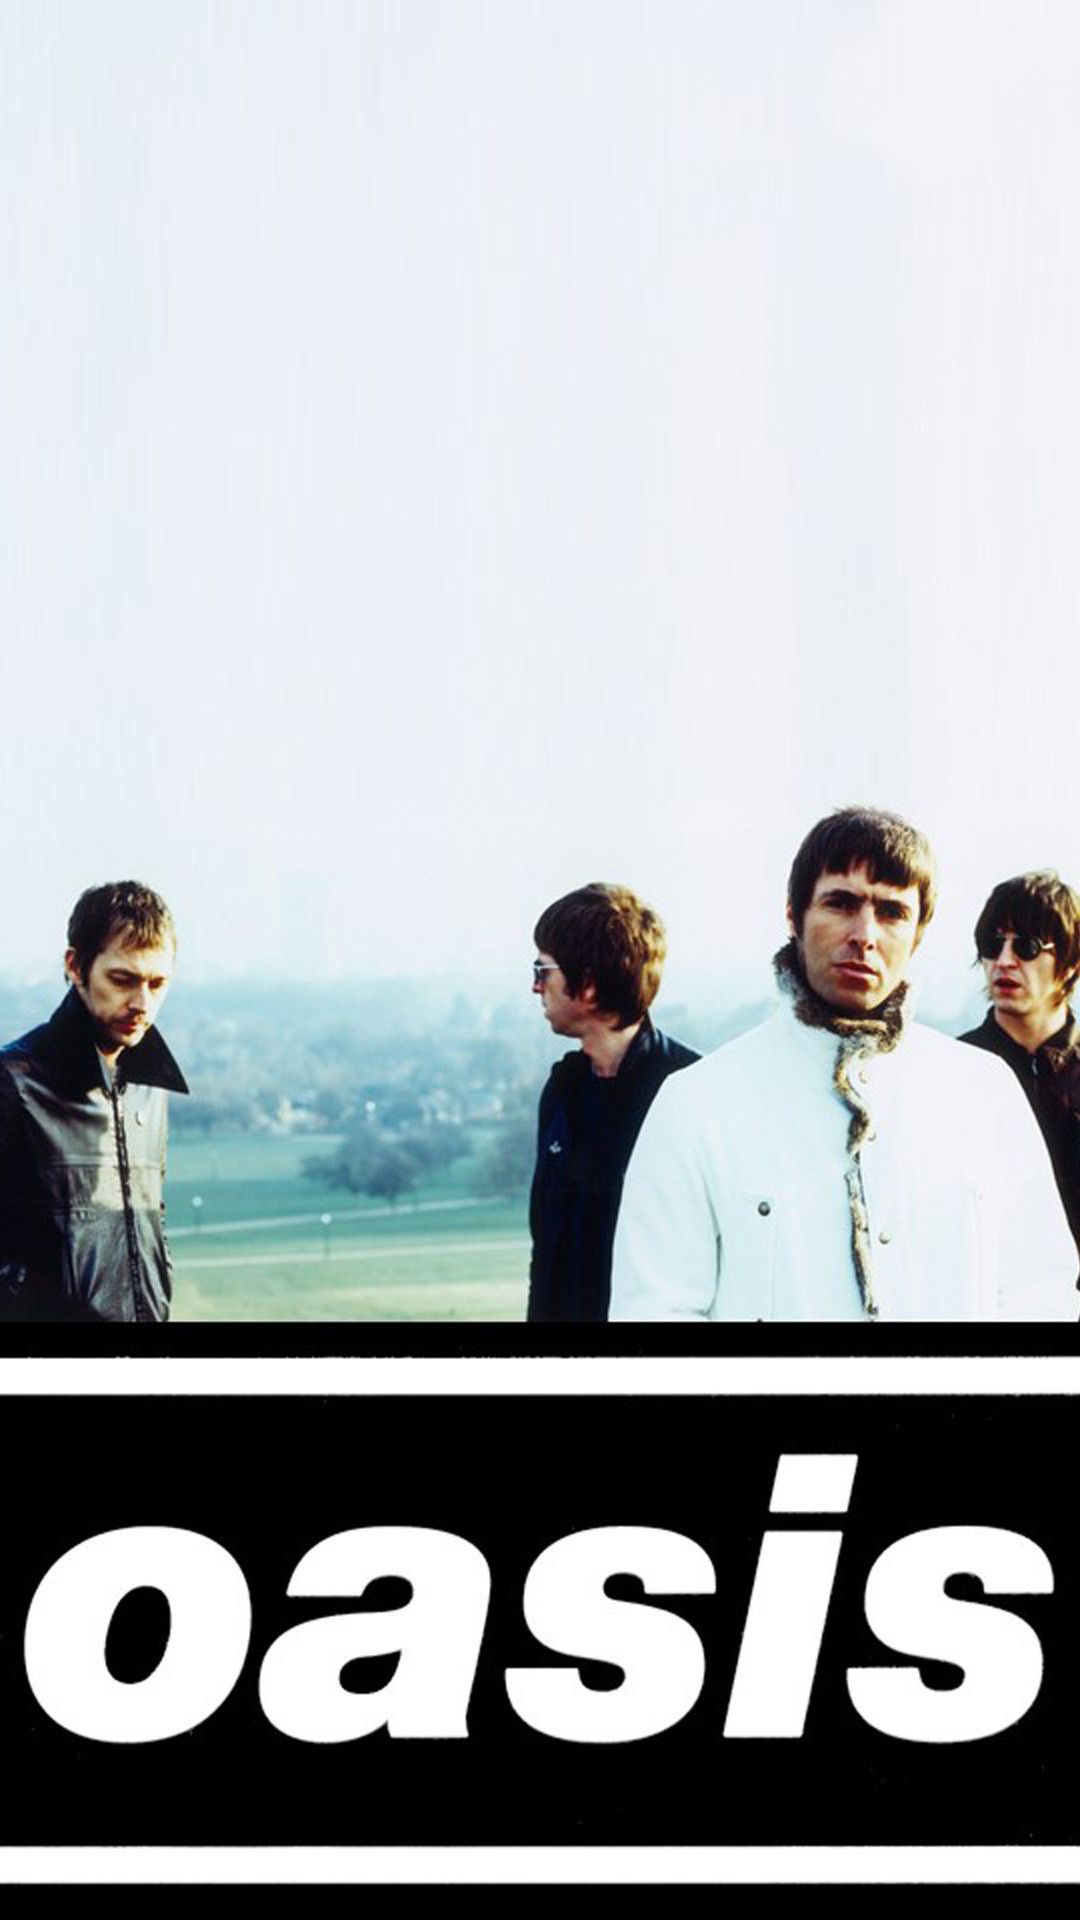 Oasis Band Wallpaper Free Oasis Band Background